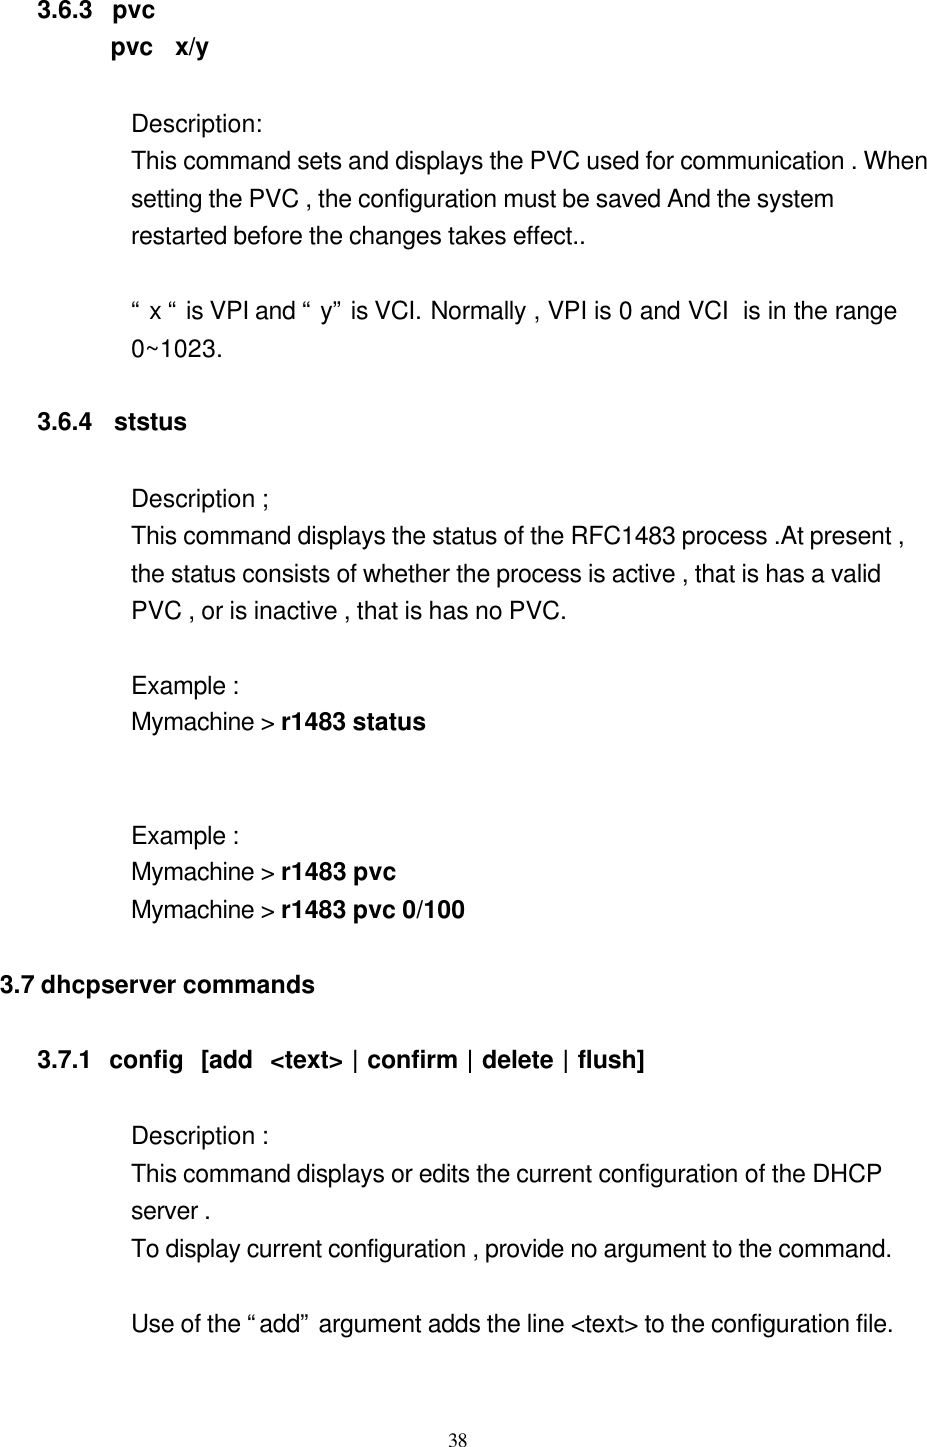  38  3.6.3  pvc       pvc  x/y     Description:   This command sets and displays the PVC used for communication . When   setting the PVC , the configuration must be saved And the system   restarted before the changes takes effect..    “ x “ is VPI and “ y” is VCI. Normally , VPI is 0 and VCI  is in the range   0~1023.  3.6.4  ststus  Description ; This command displays the status of the RFC1483 process .At present ,   the status consists of whether the process is active , that is has a valid   PVC , or is inactive , that is has no PVC.  Example : Mymachine &gt; r1483 status   Example : Mymachine &gt; r1483 pvc Mymachine &gt; r1483 pvc 0/100  3.7 dhcpserver commands  3.7.1  config  [add  &lt;text&gt; | confirm | delete | flush]  Description : This command displays or edits the current configuration of the DHCP   server . To display current configuration , provide no argument to the command.  Use of the “add” argument adds the line &lt;text&gt; to the configuration file.  